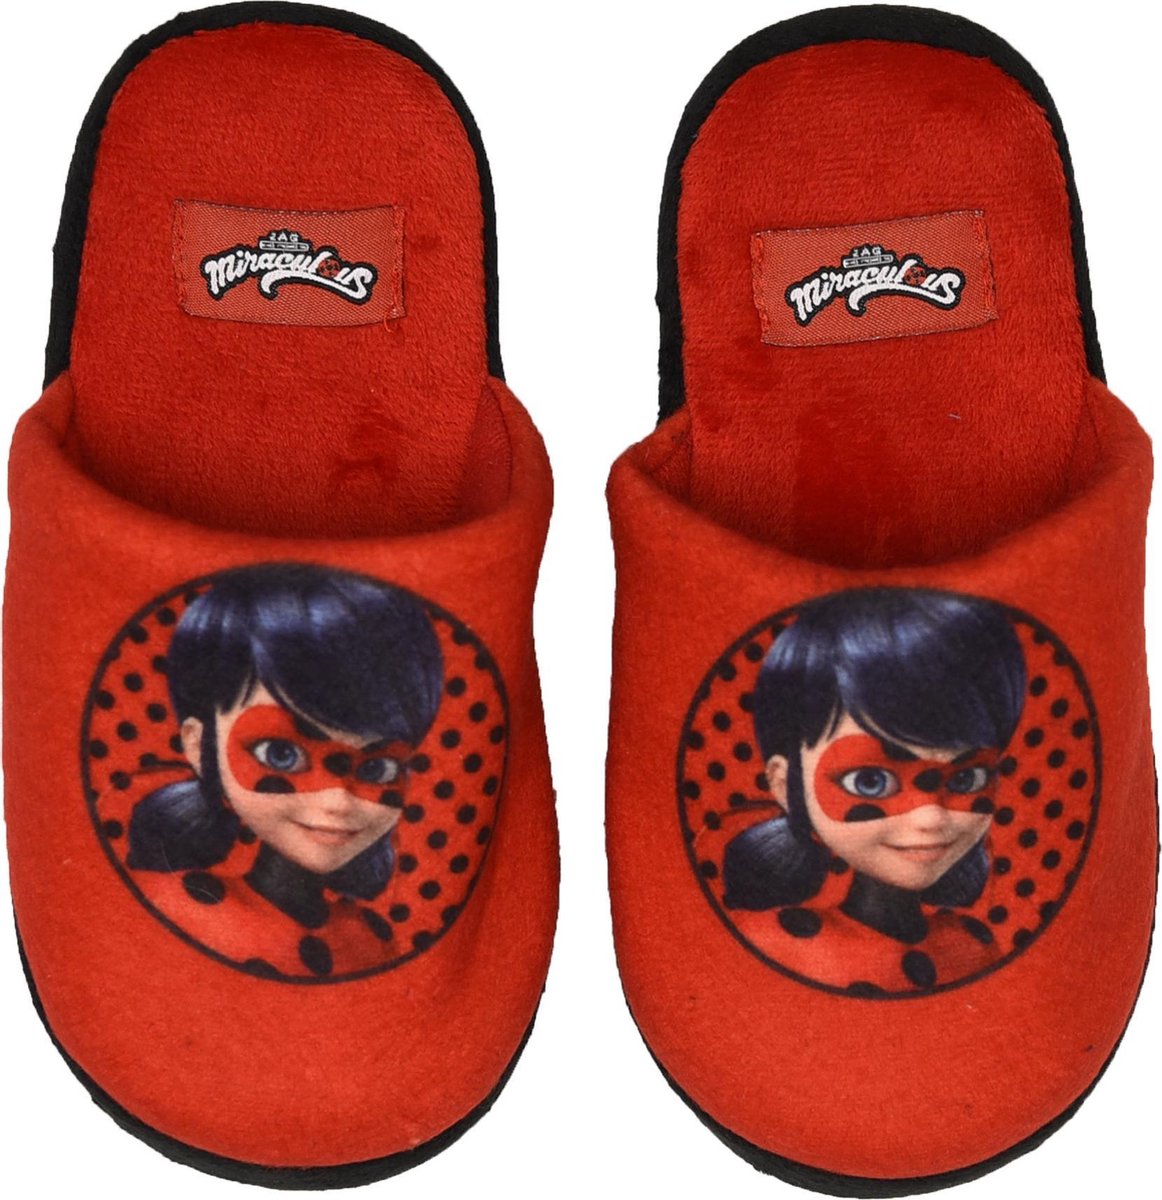 Zagtoon Slippers Junior Polyester Rood Maat 26-27